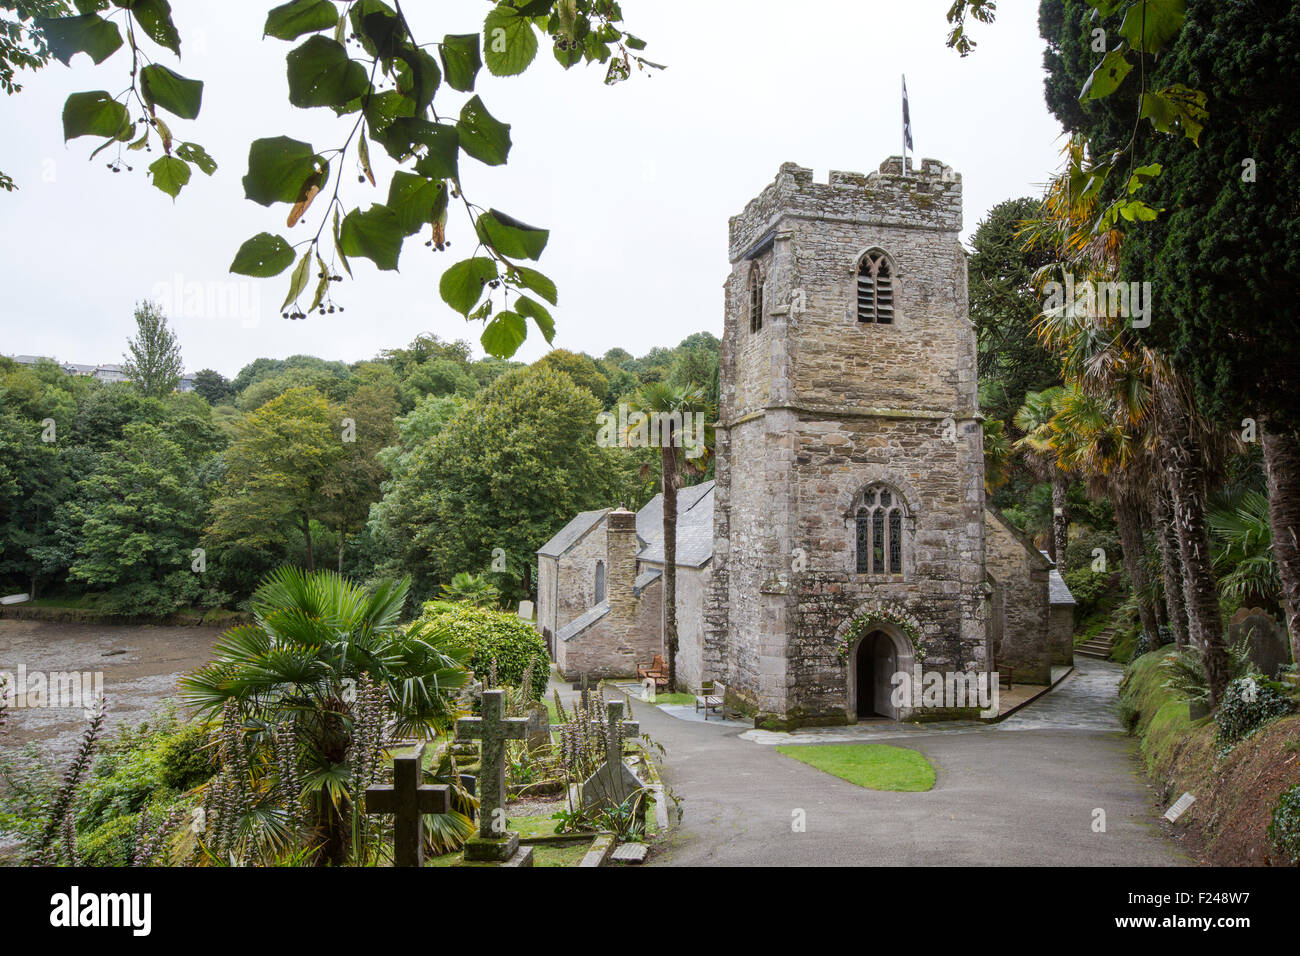 The famous St Just in Roseland church in Cornwall, UK. Stock Photo